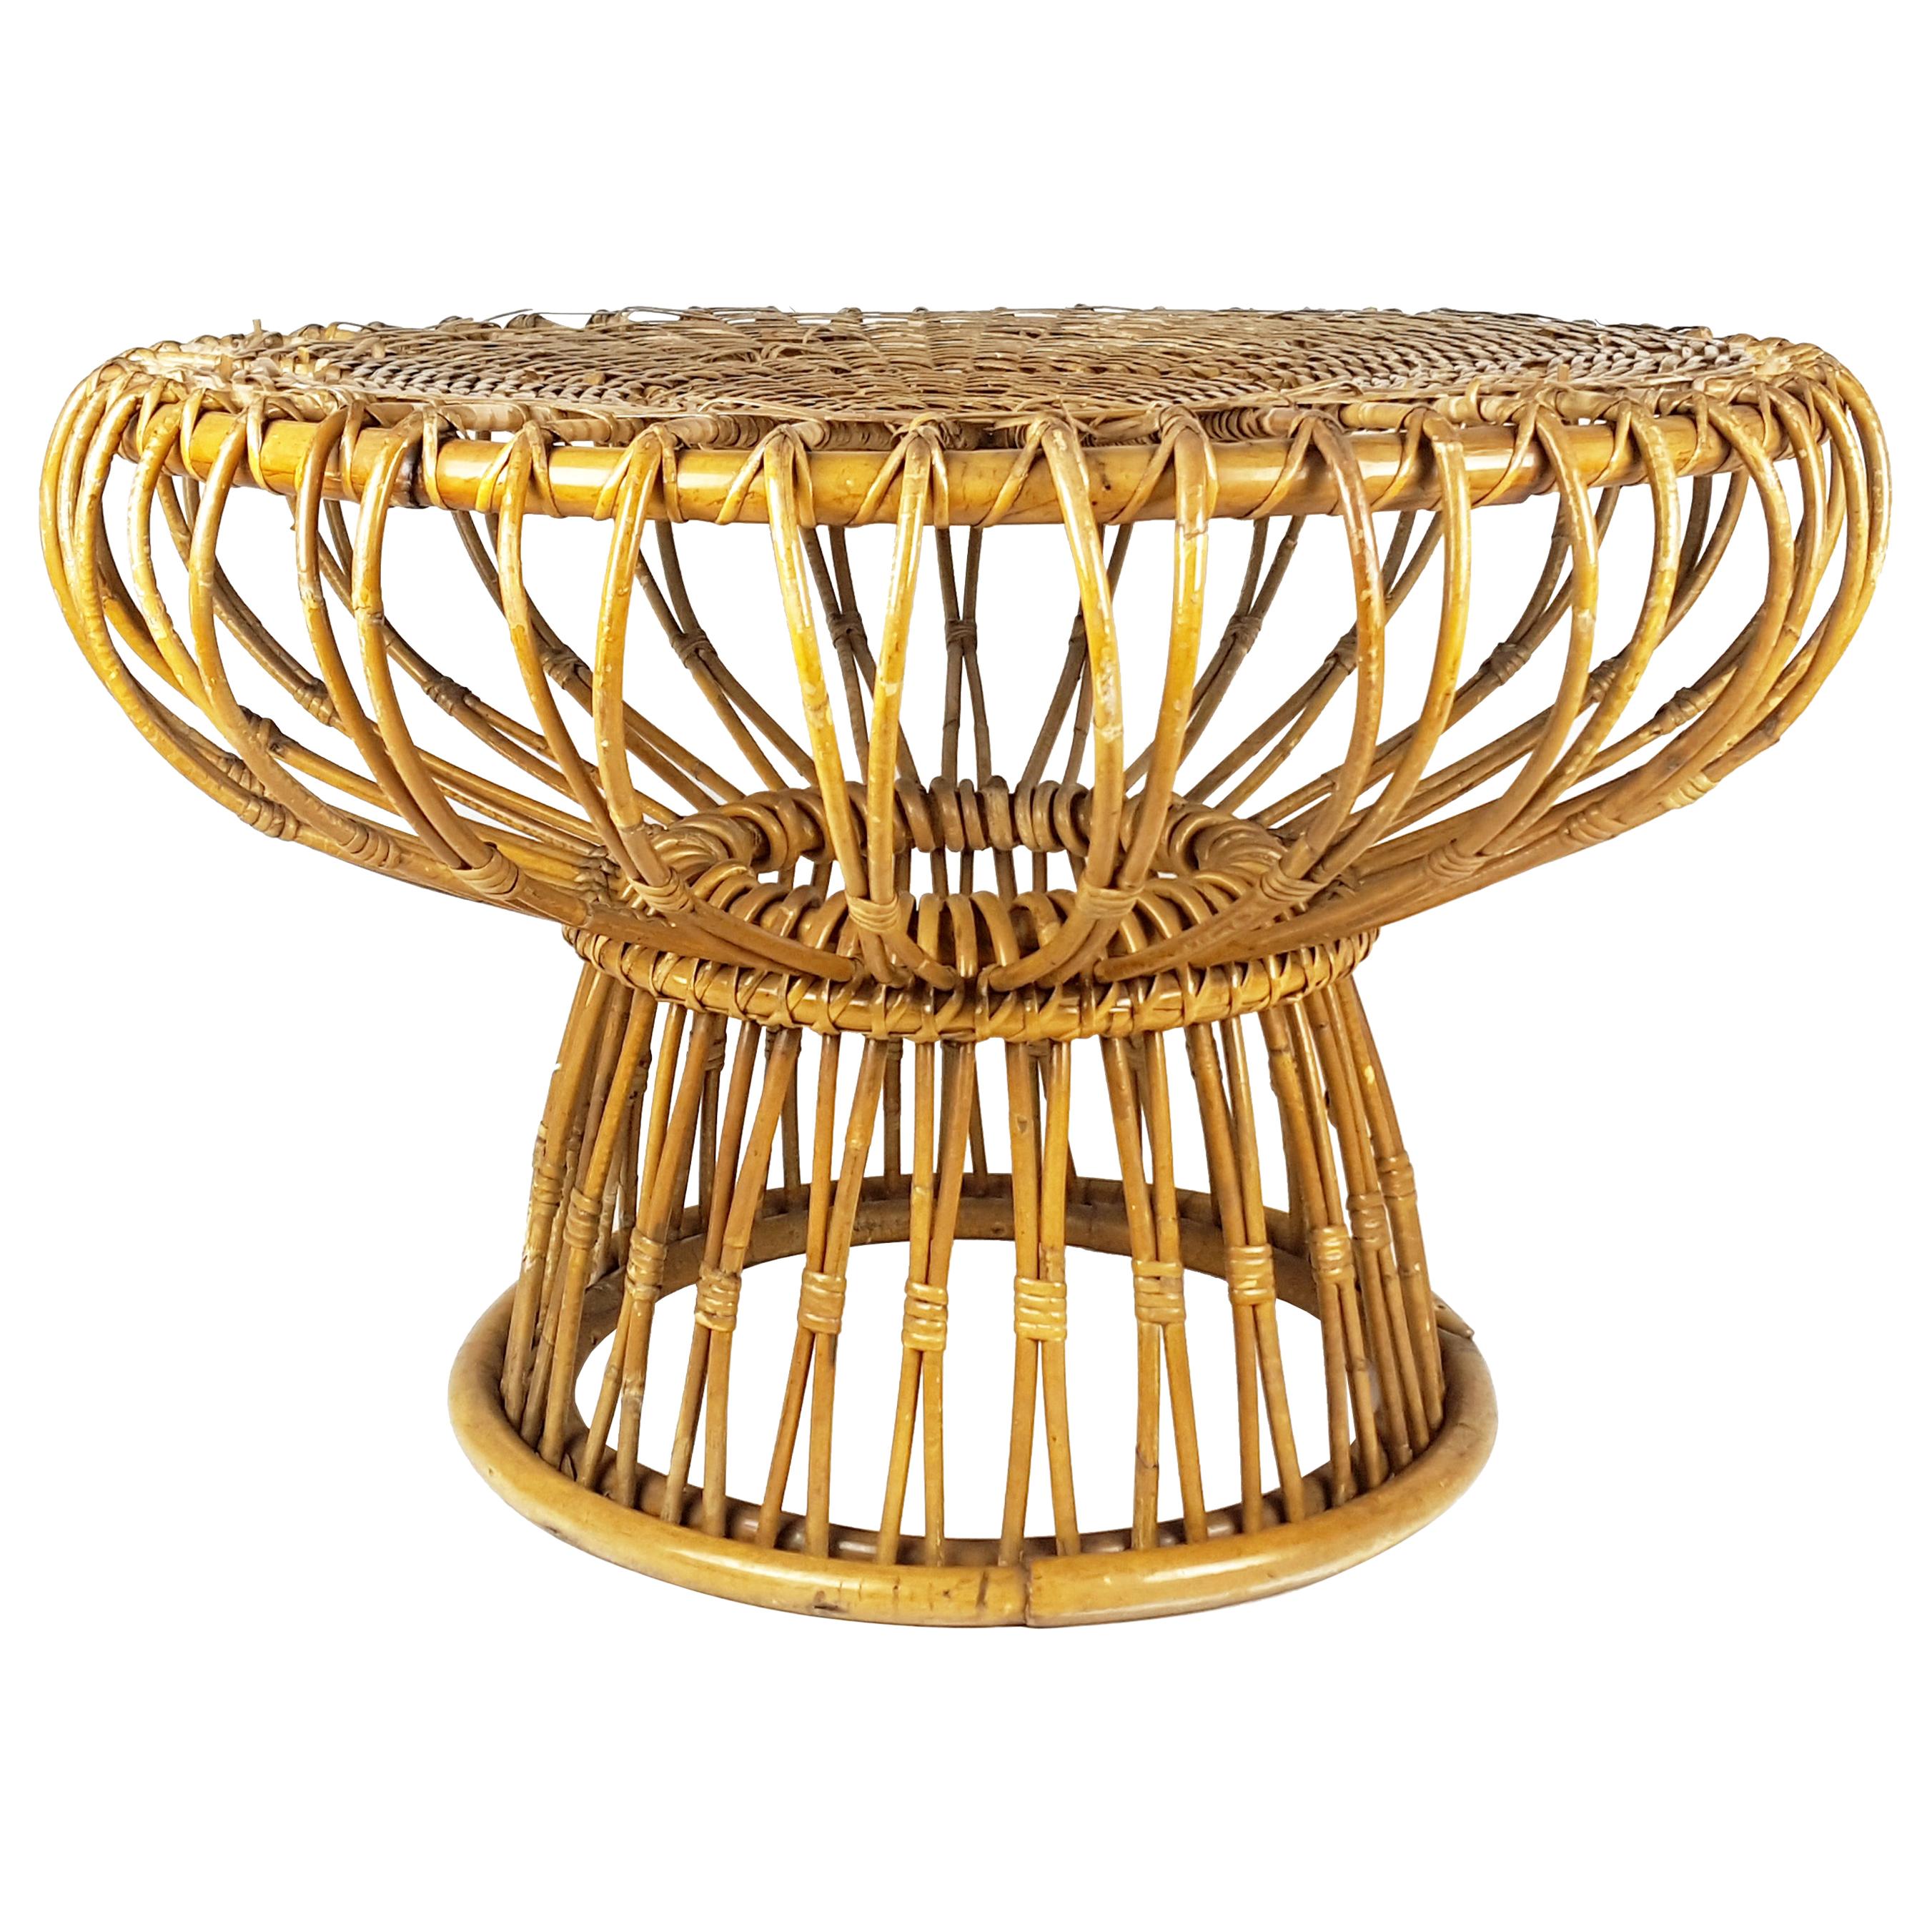 Rush and Rattan Midcentury Round Coffee Table by Franca Helg for Bonacina, 1955